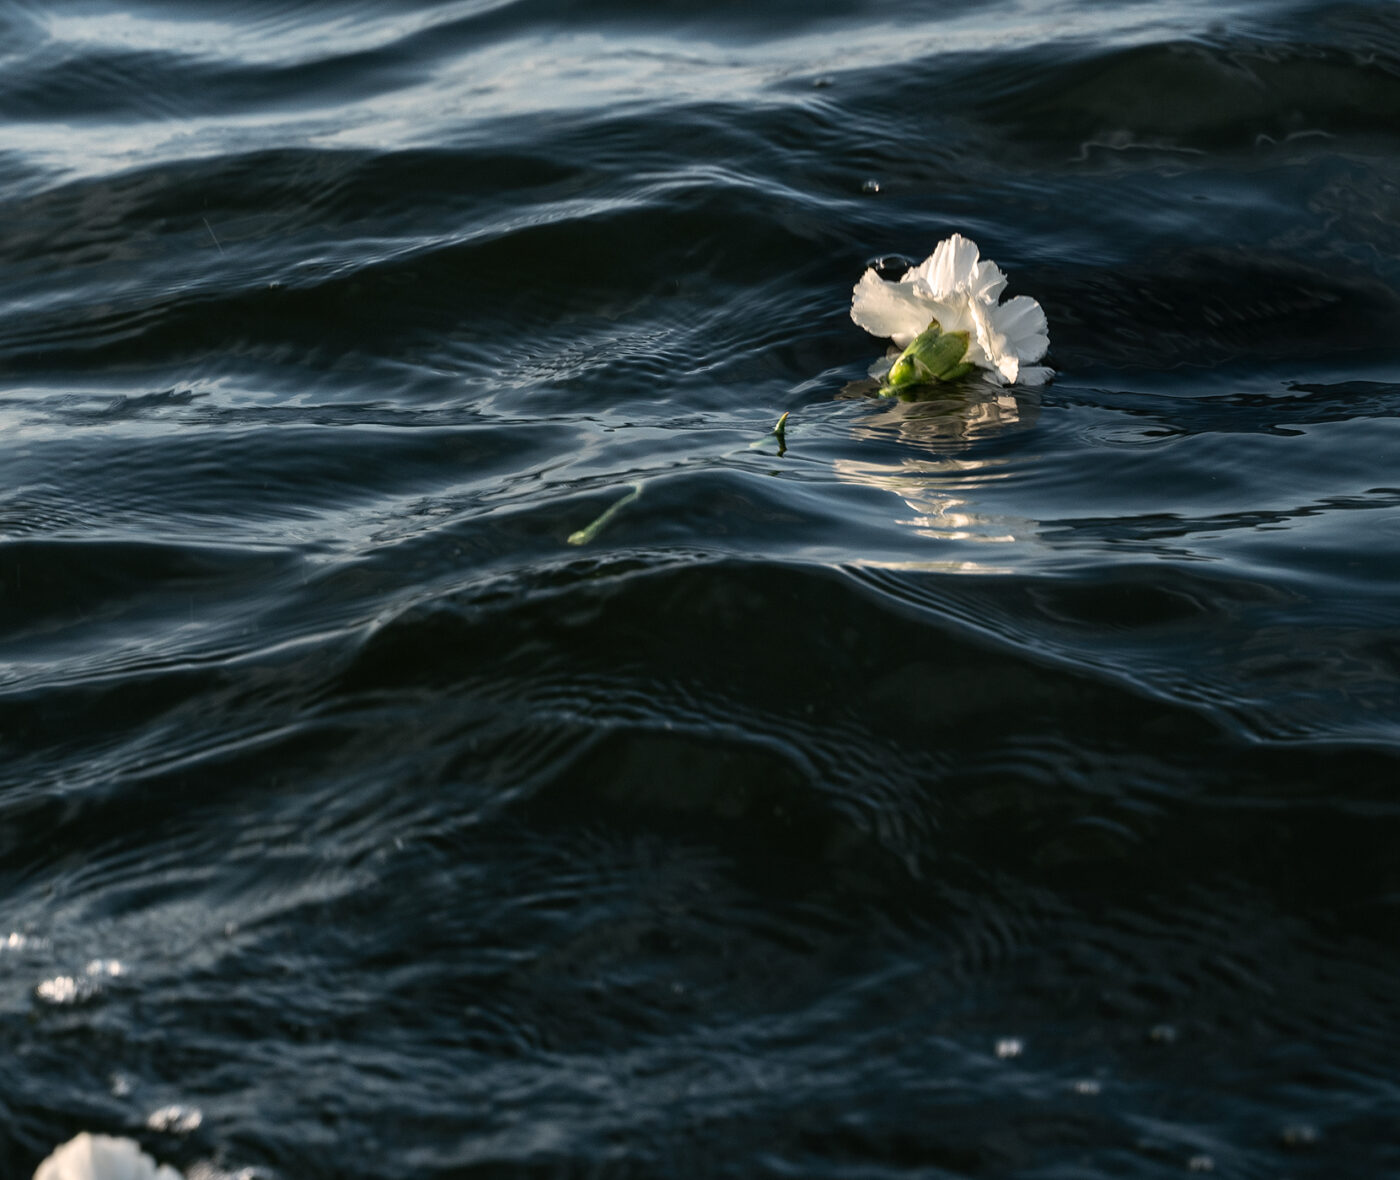 A white carnation floats in a body of water